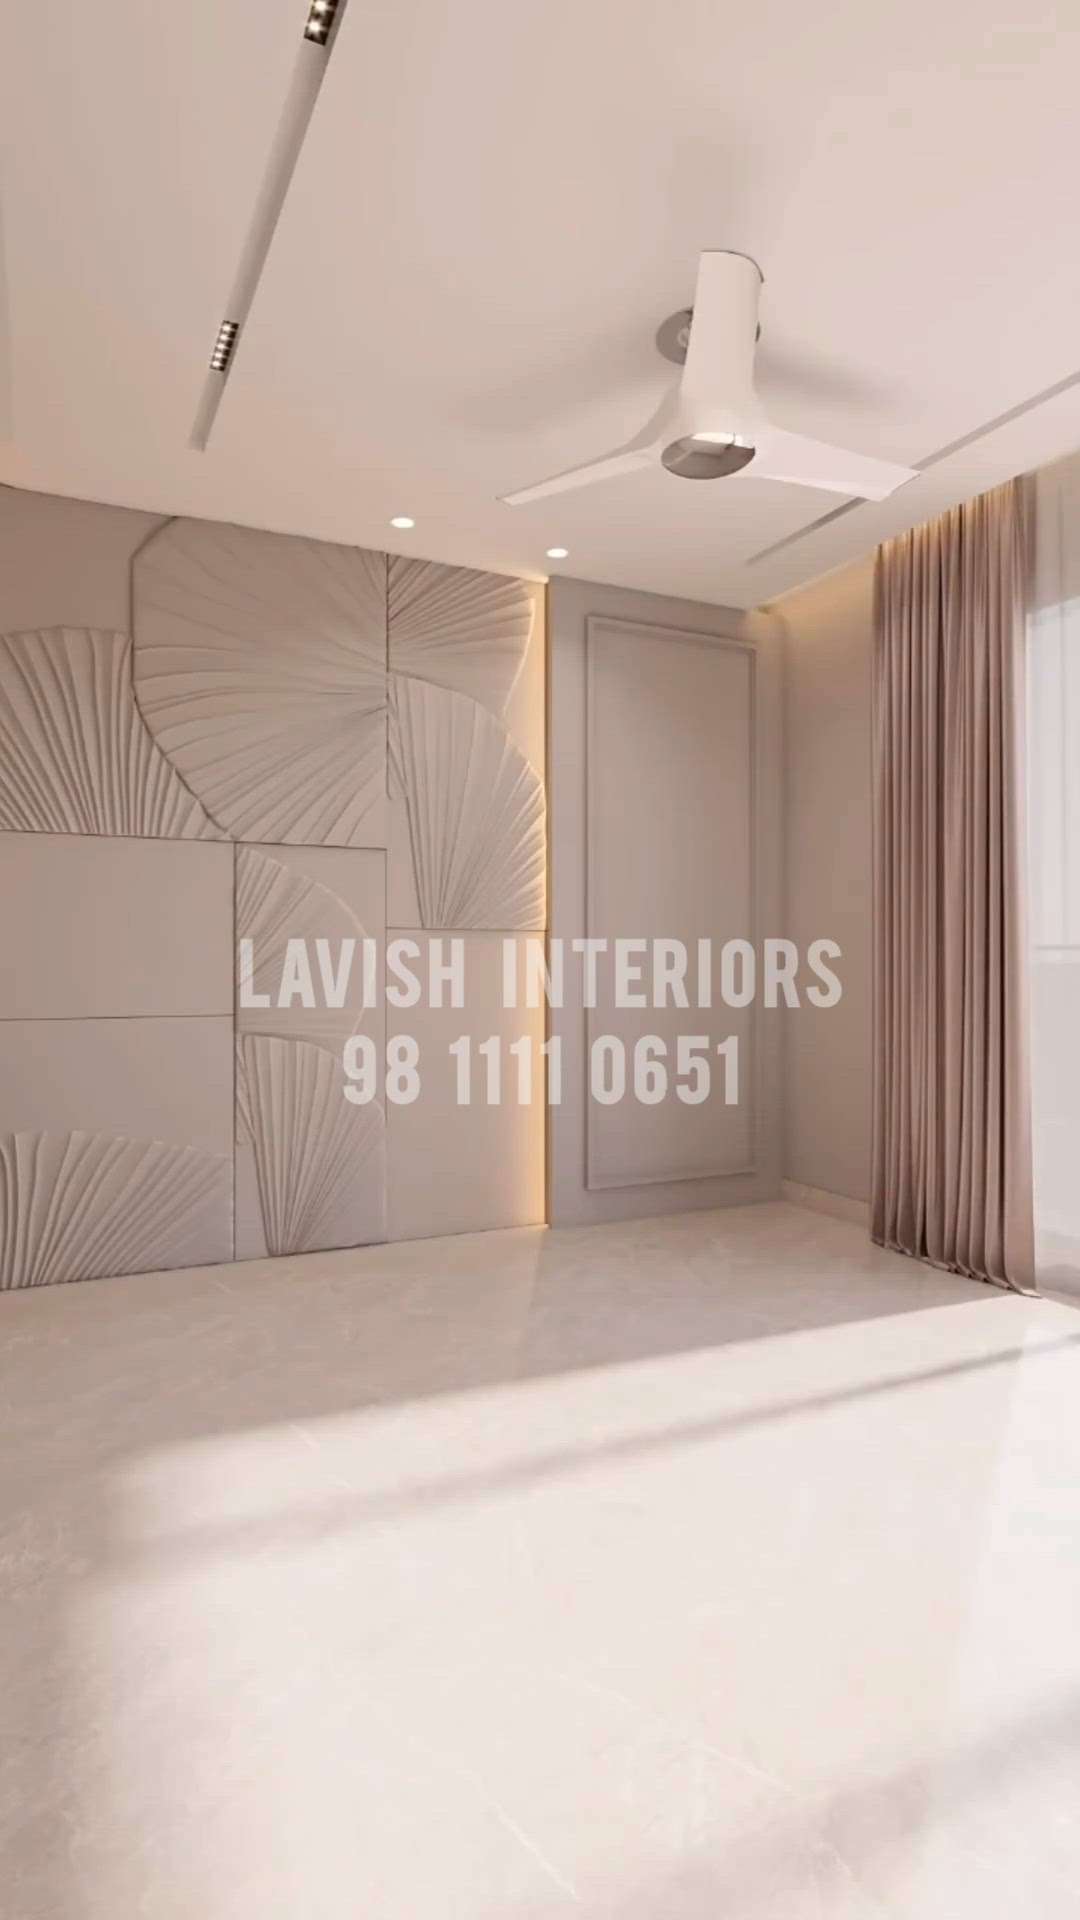 Get your dream home designed by us 💫
📩 Comment or DM ' 
📞Contact - +91 9811110651
💻 https://lavishinterior.co.in/
Follow lavish.interiors03
➖➖➖➖➖➖➖➖ #interiordesign #designinterior #interiordesigner #designdeinteriores #interiordesignideas #interiordesigners #designerdeinteriores #interiordesigns #interiordesigninspiration
.
.
.
#interiordesign #designinterior #interiordesigner #designdeinteriores